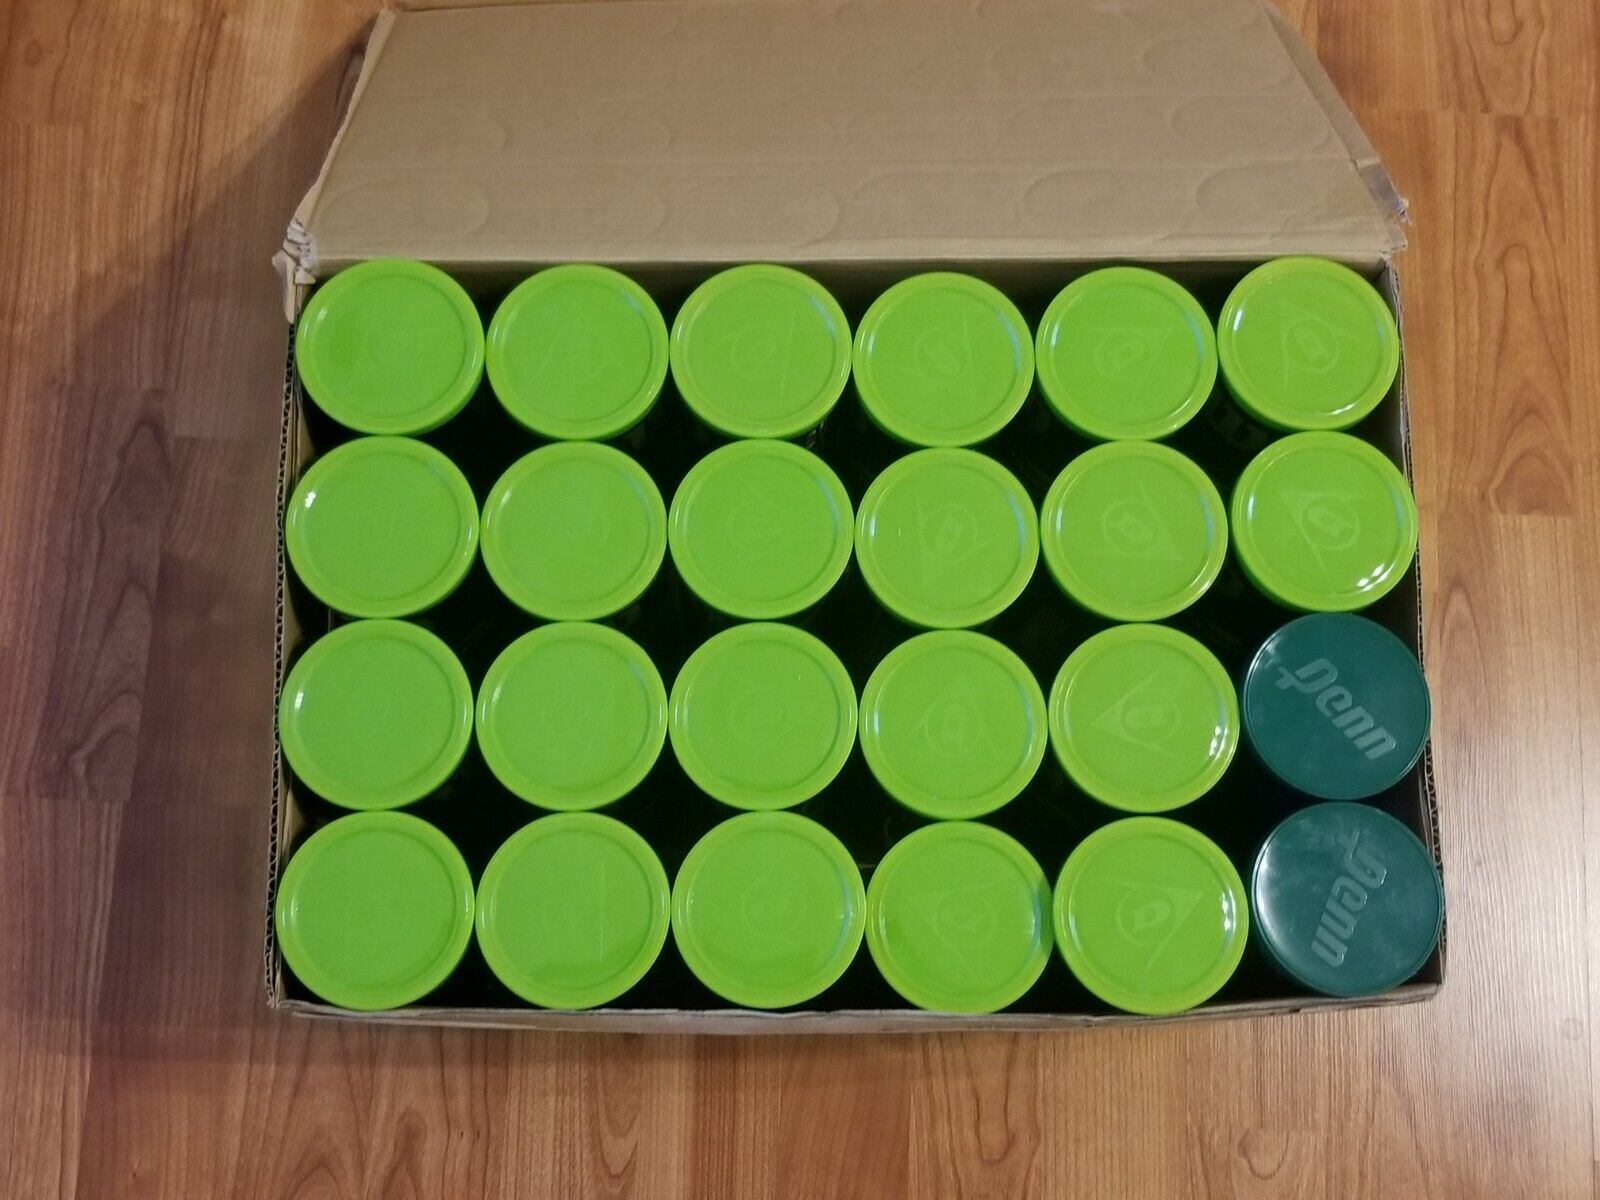 24 Empty Tennis Ball Cans With Lids - 22 Lime Green & 2 Dark Green - New